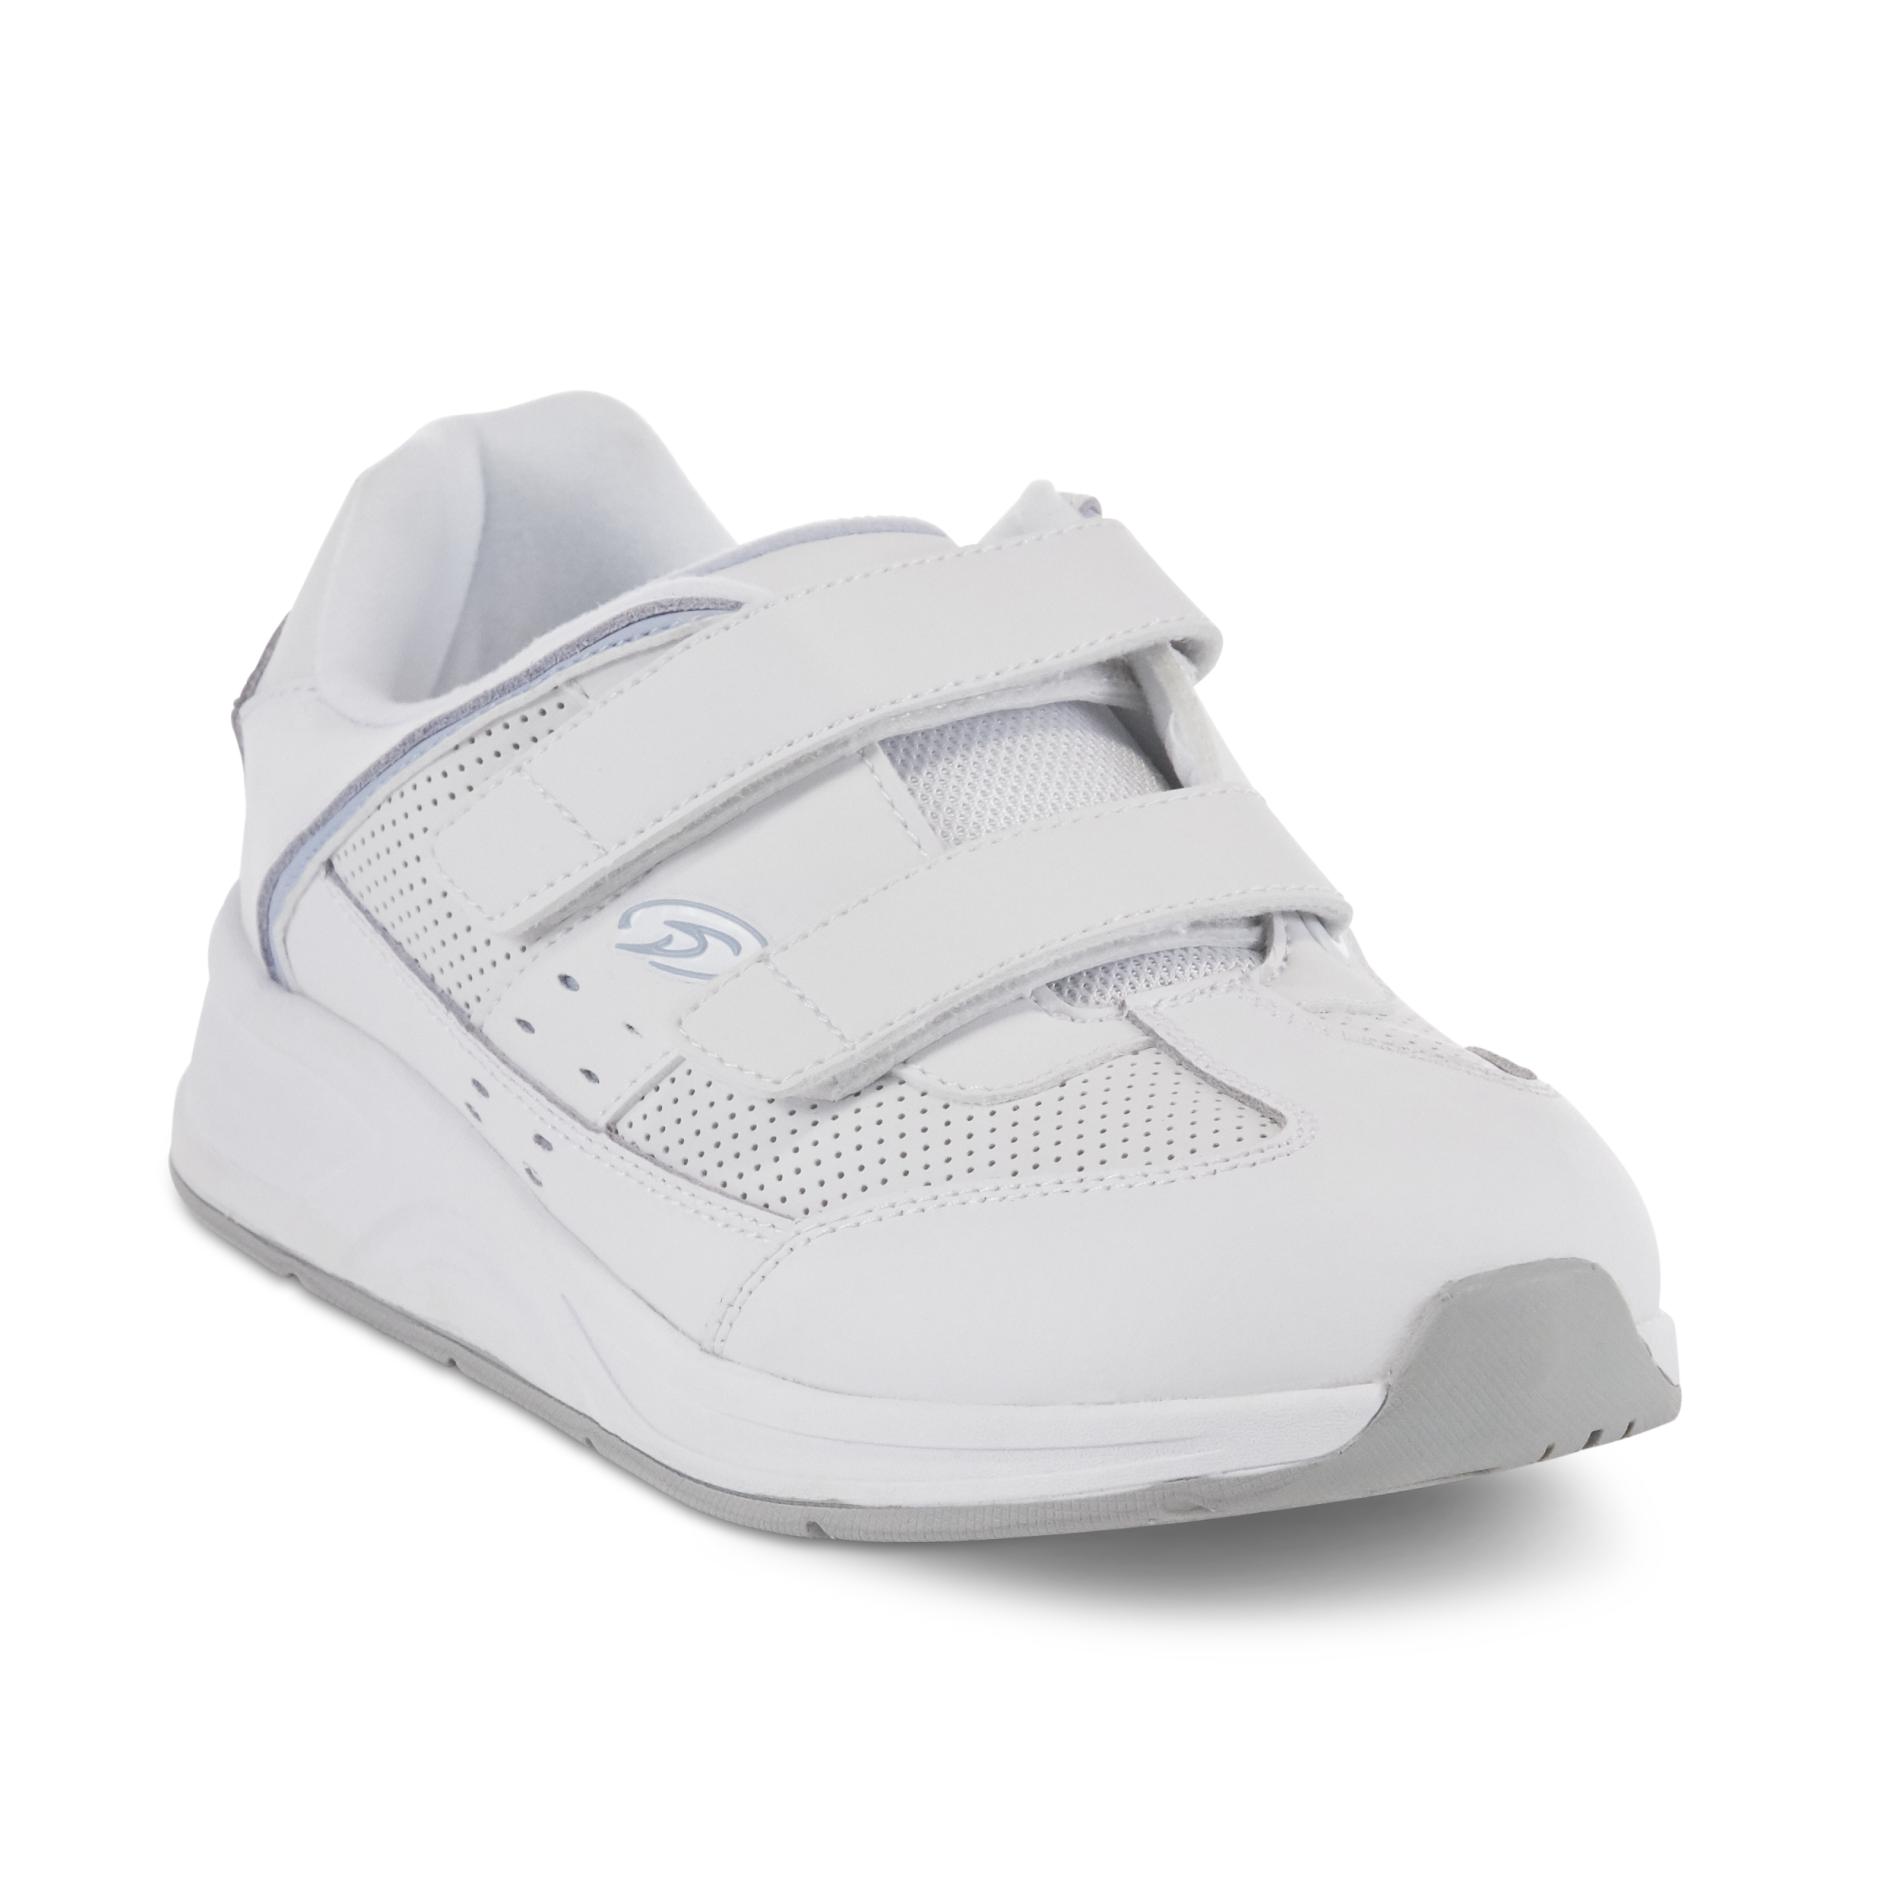 dr scholl's therapeutic shoes